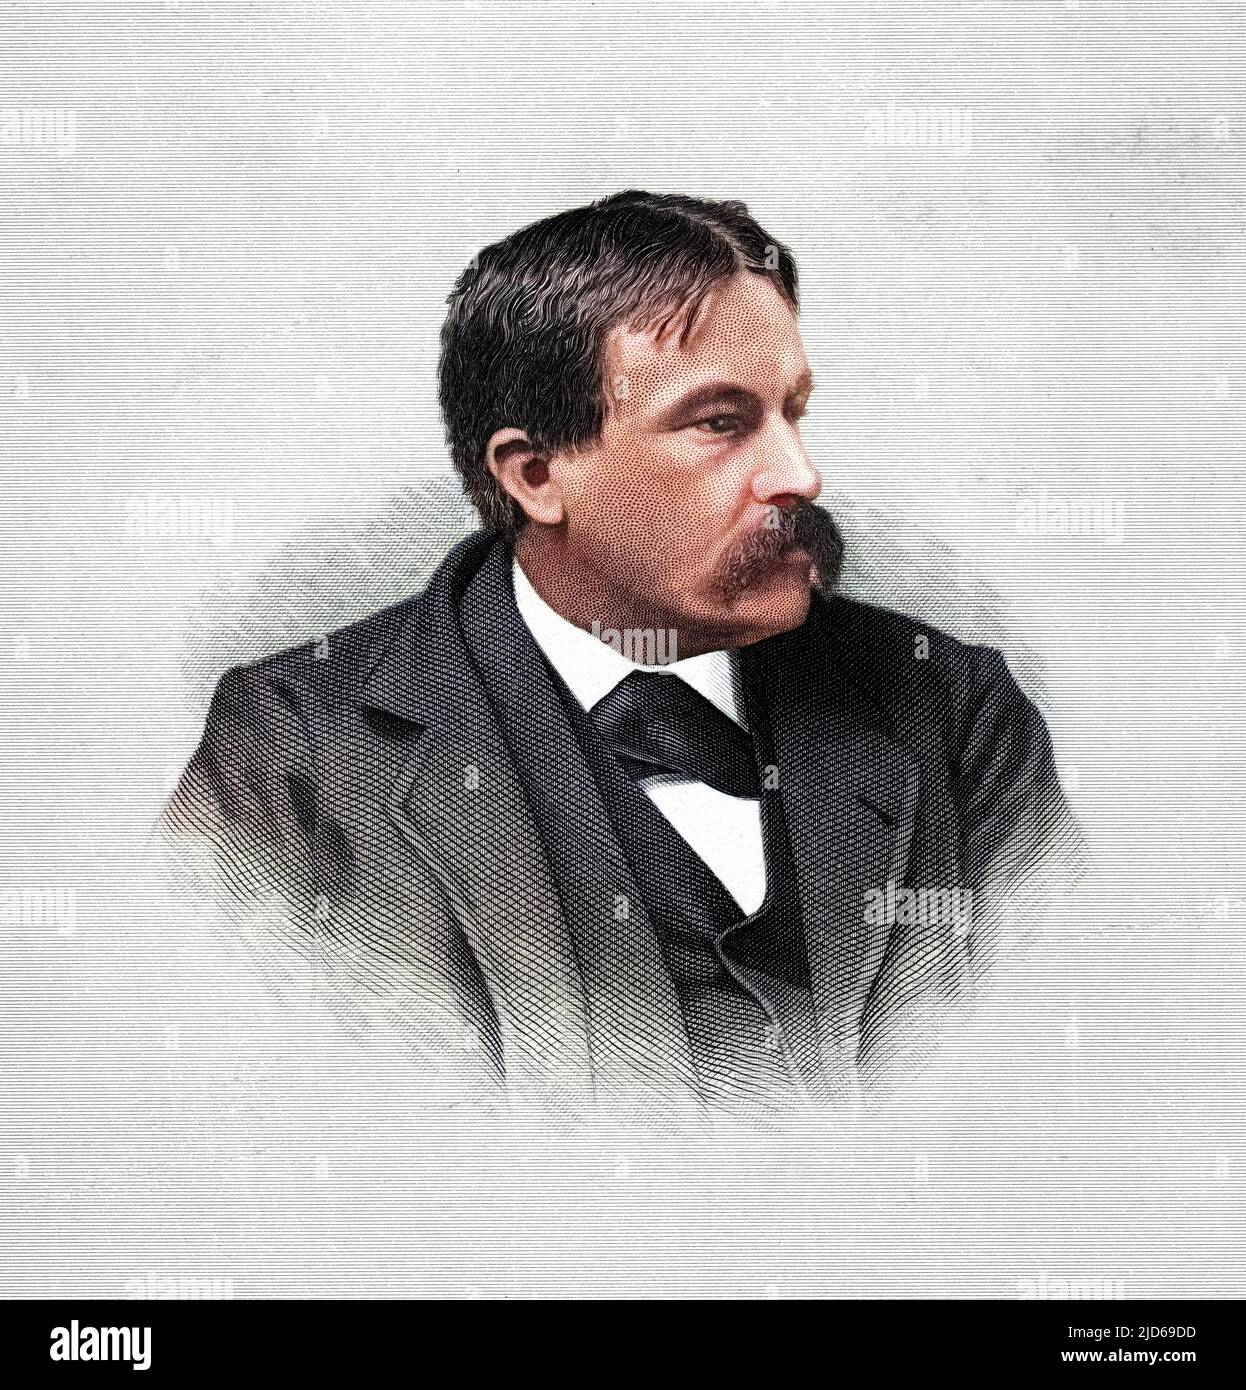 WILLIAM DEAN HOWELLS American writer, author of 'The rise of Silas Lapham' and many other novels, also verse and criticism : regarded as the dean of American letters. Colourised version of : 10161352       Date: 1837 - 1920 Stock Photo